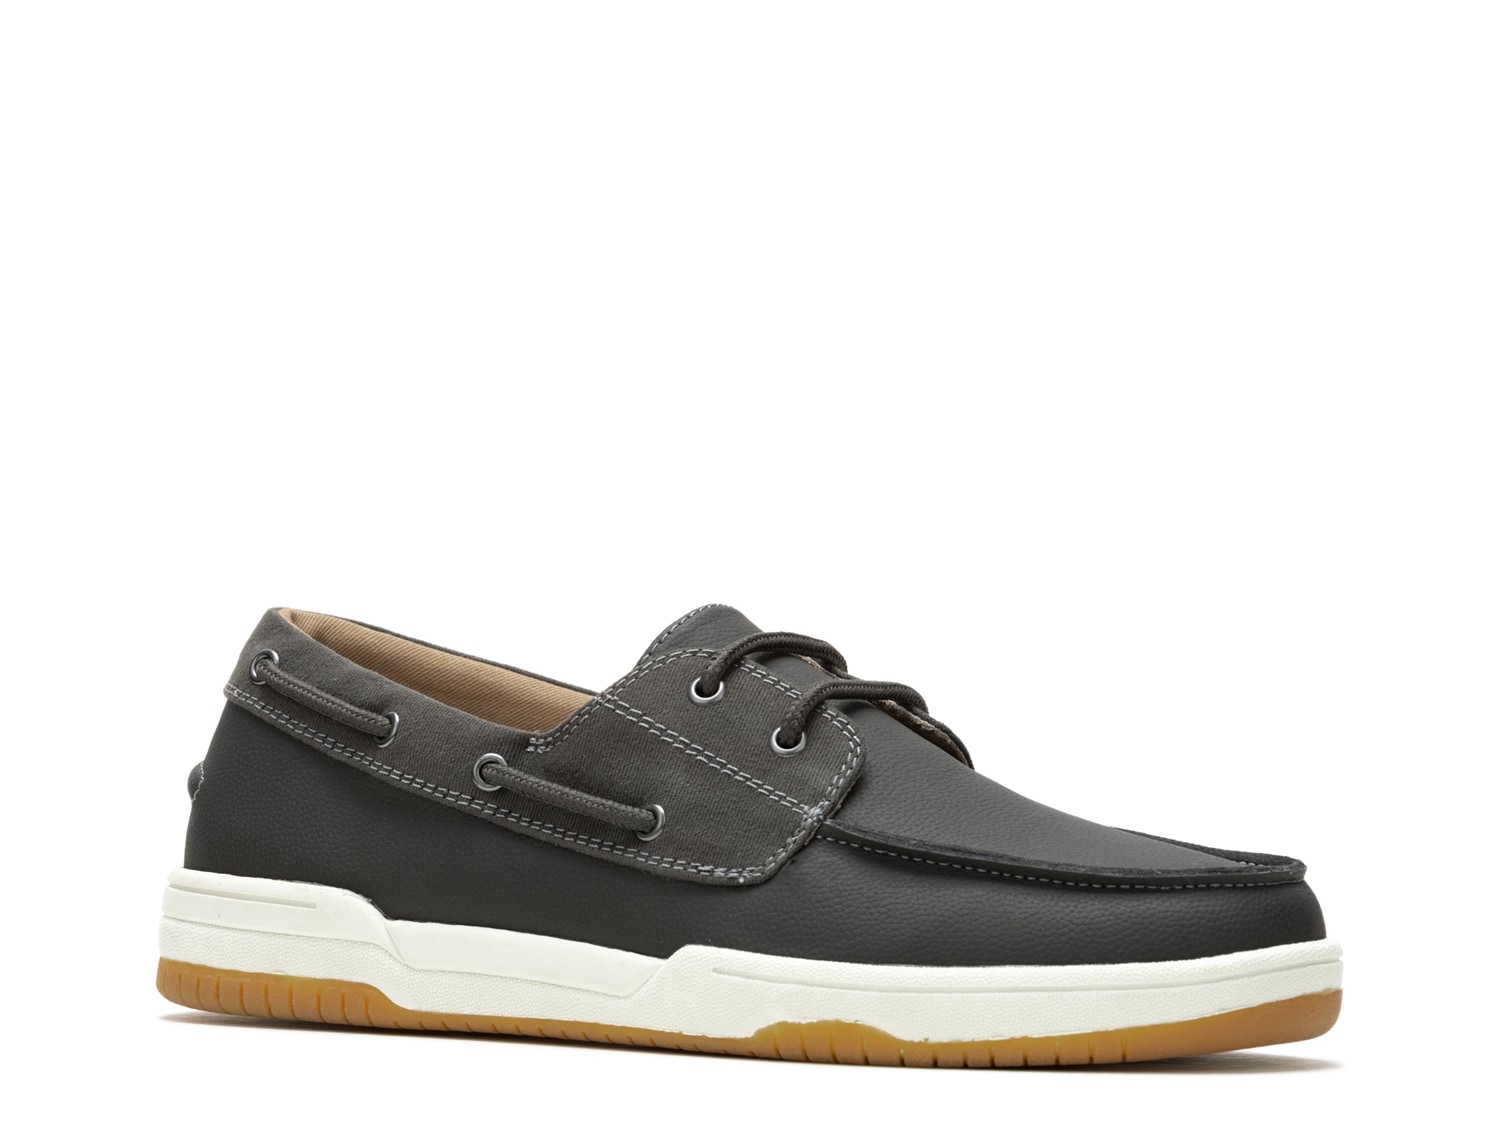 Hush Puppies Colton Boat Shoe - Free Shipping | DSW